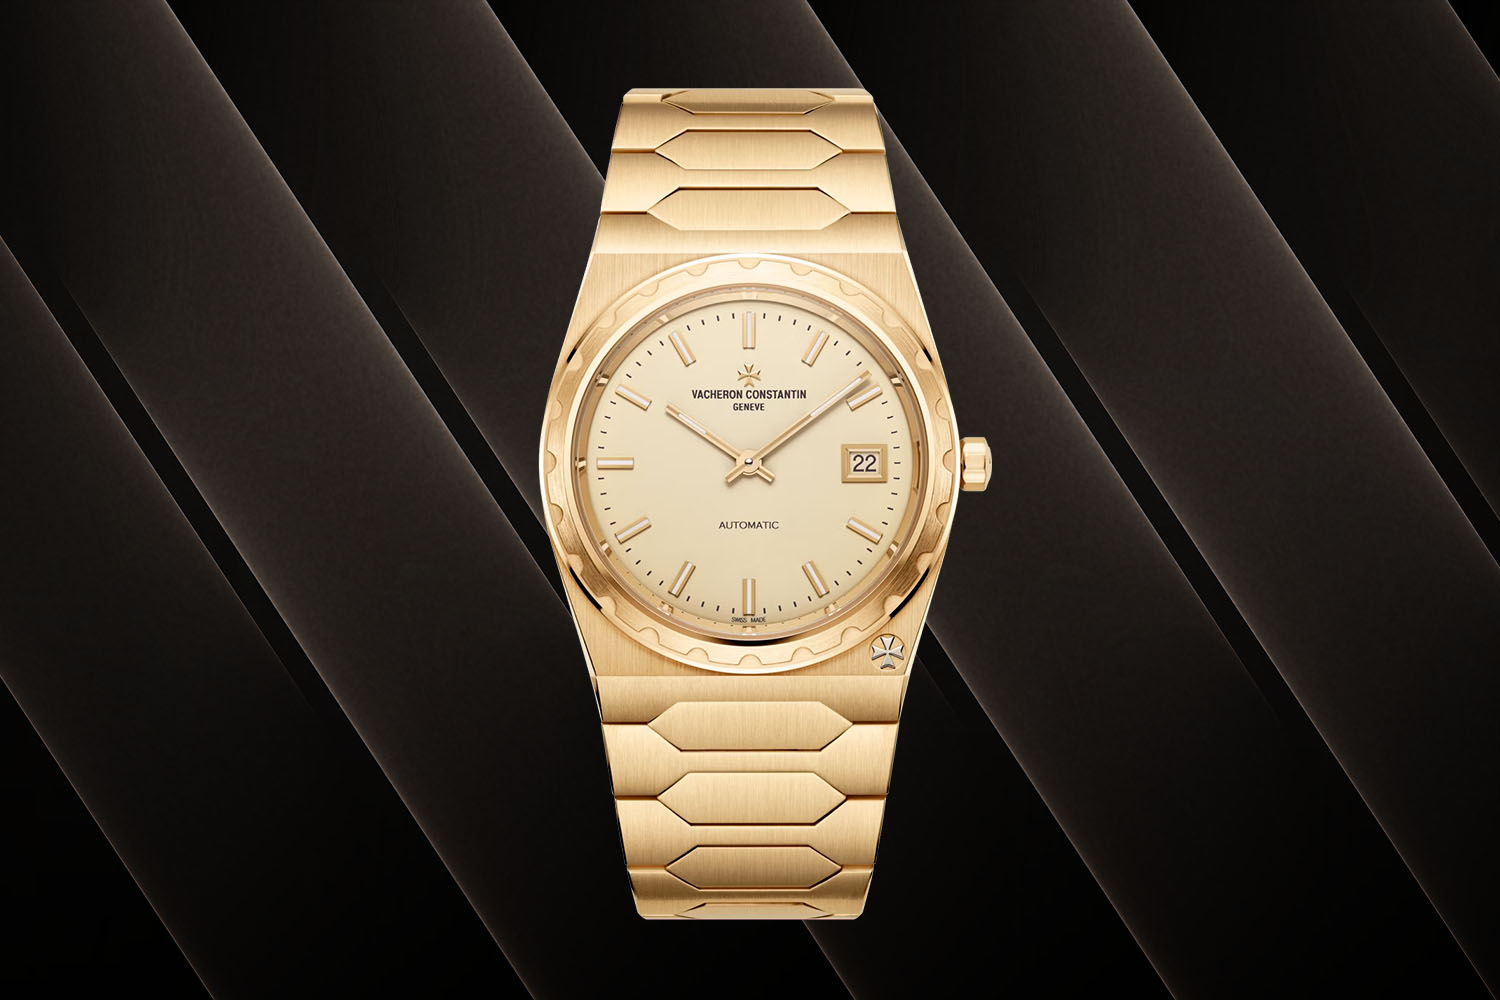 The Vacheron Constantin Historiques is one of the best luxury sports watches